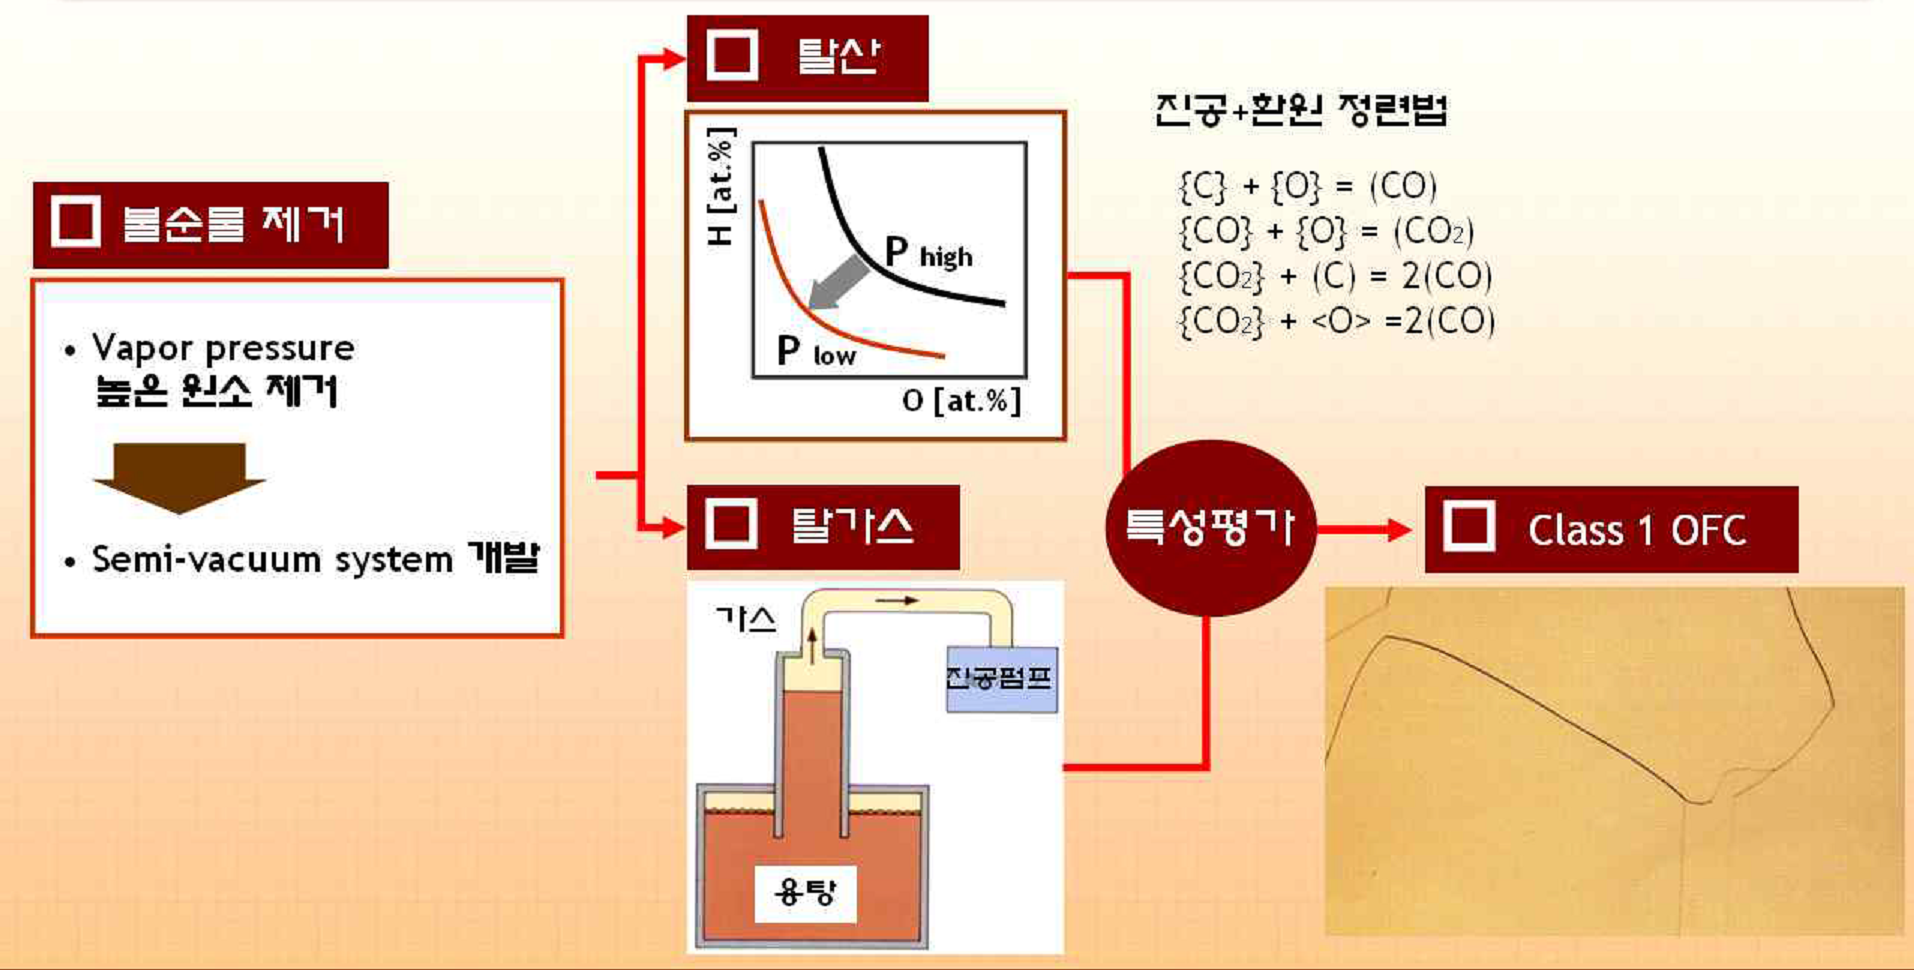 Basic principle of complex refining process for class 1 oxygen free copper